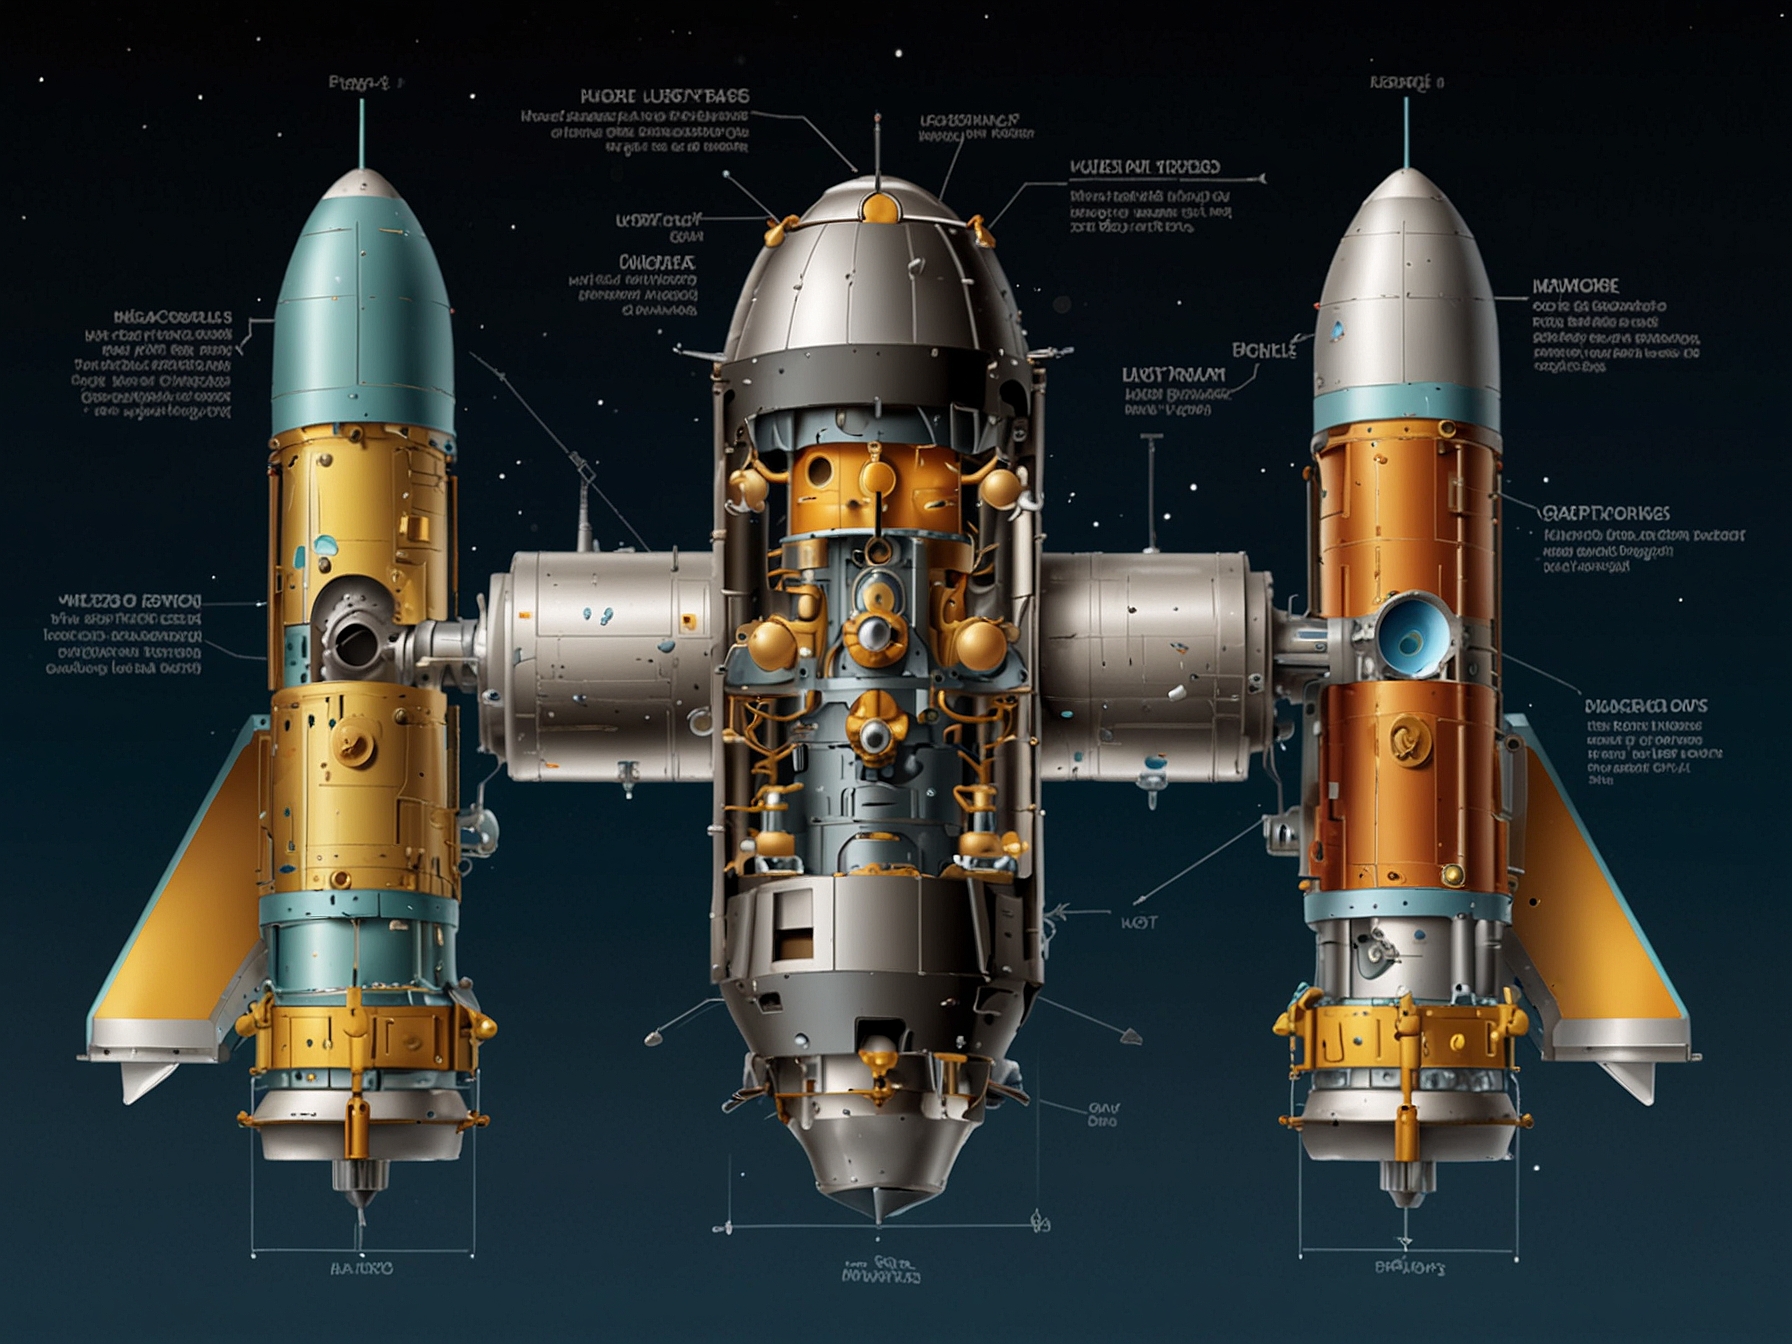 A detailed infographic showing the inner workings of the Hubble Space Telescope, highlighting the gyros and the transition to one-gyro mode for continued scientific observations.